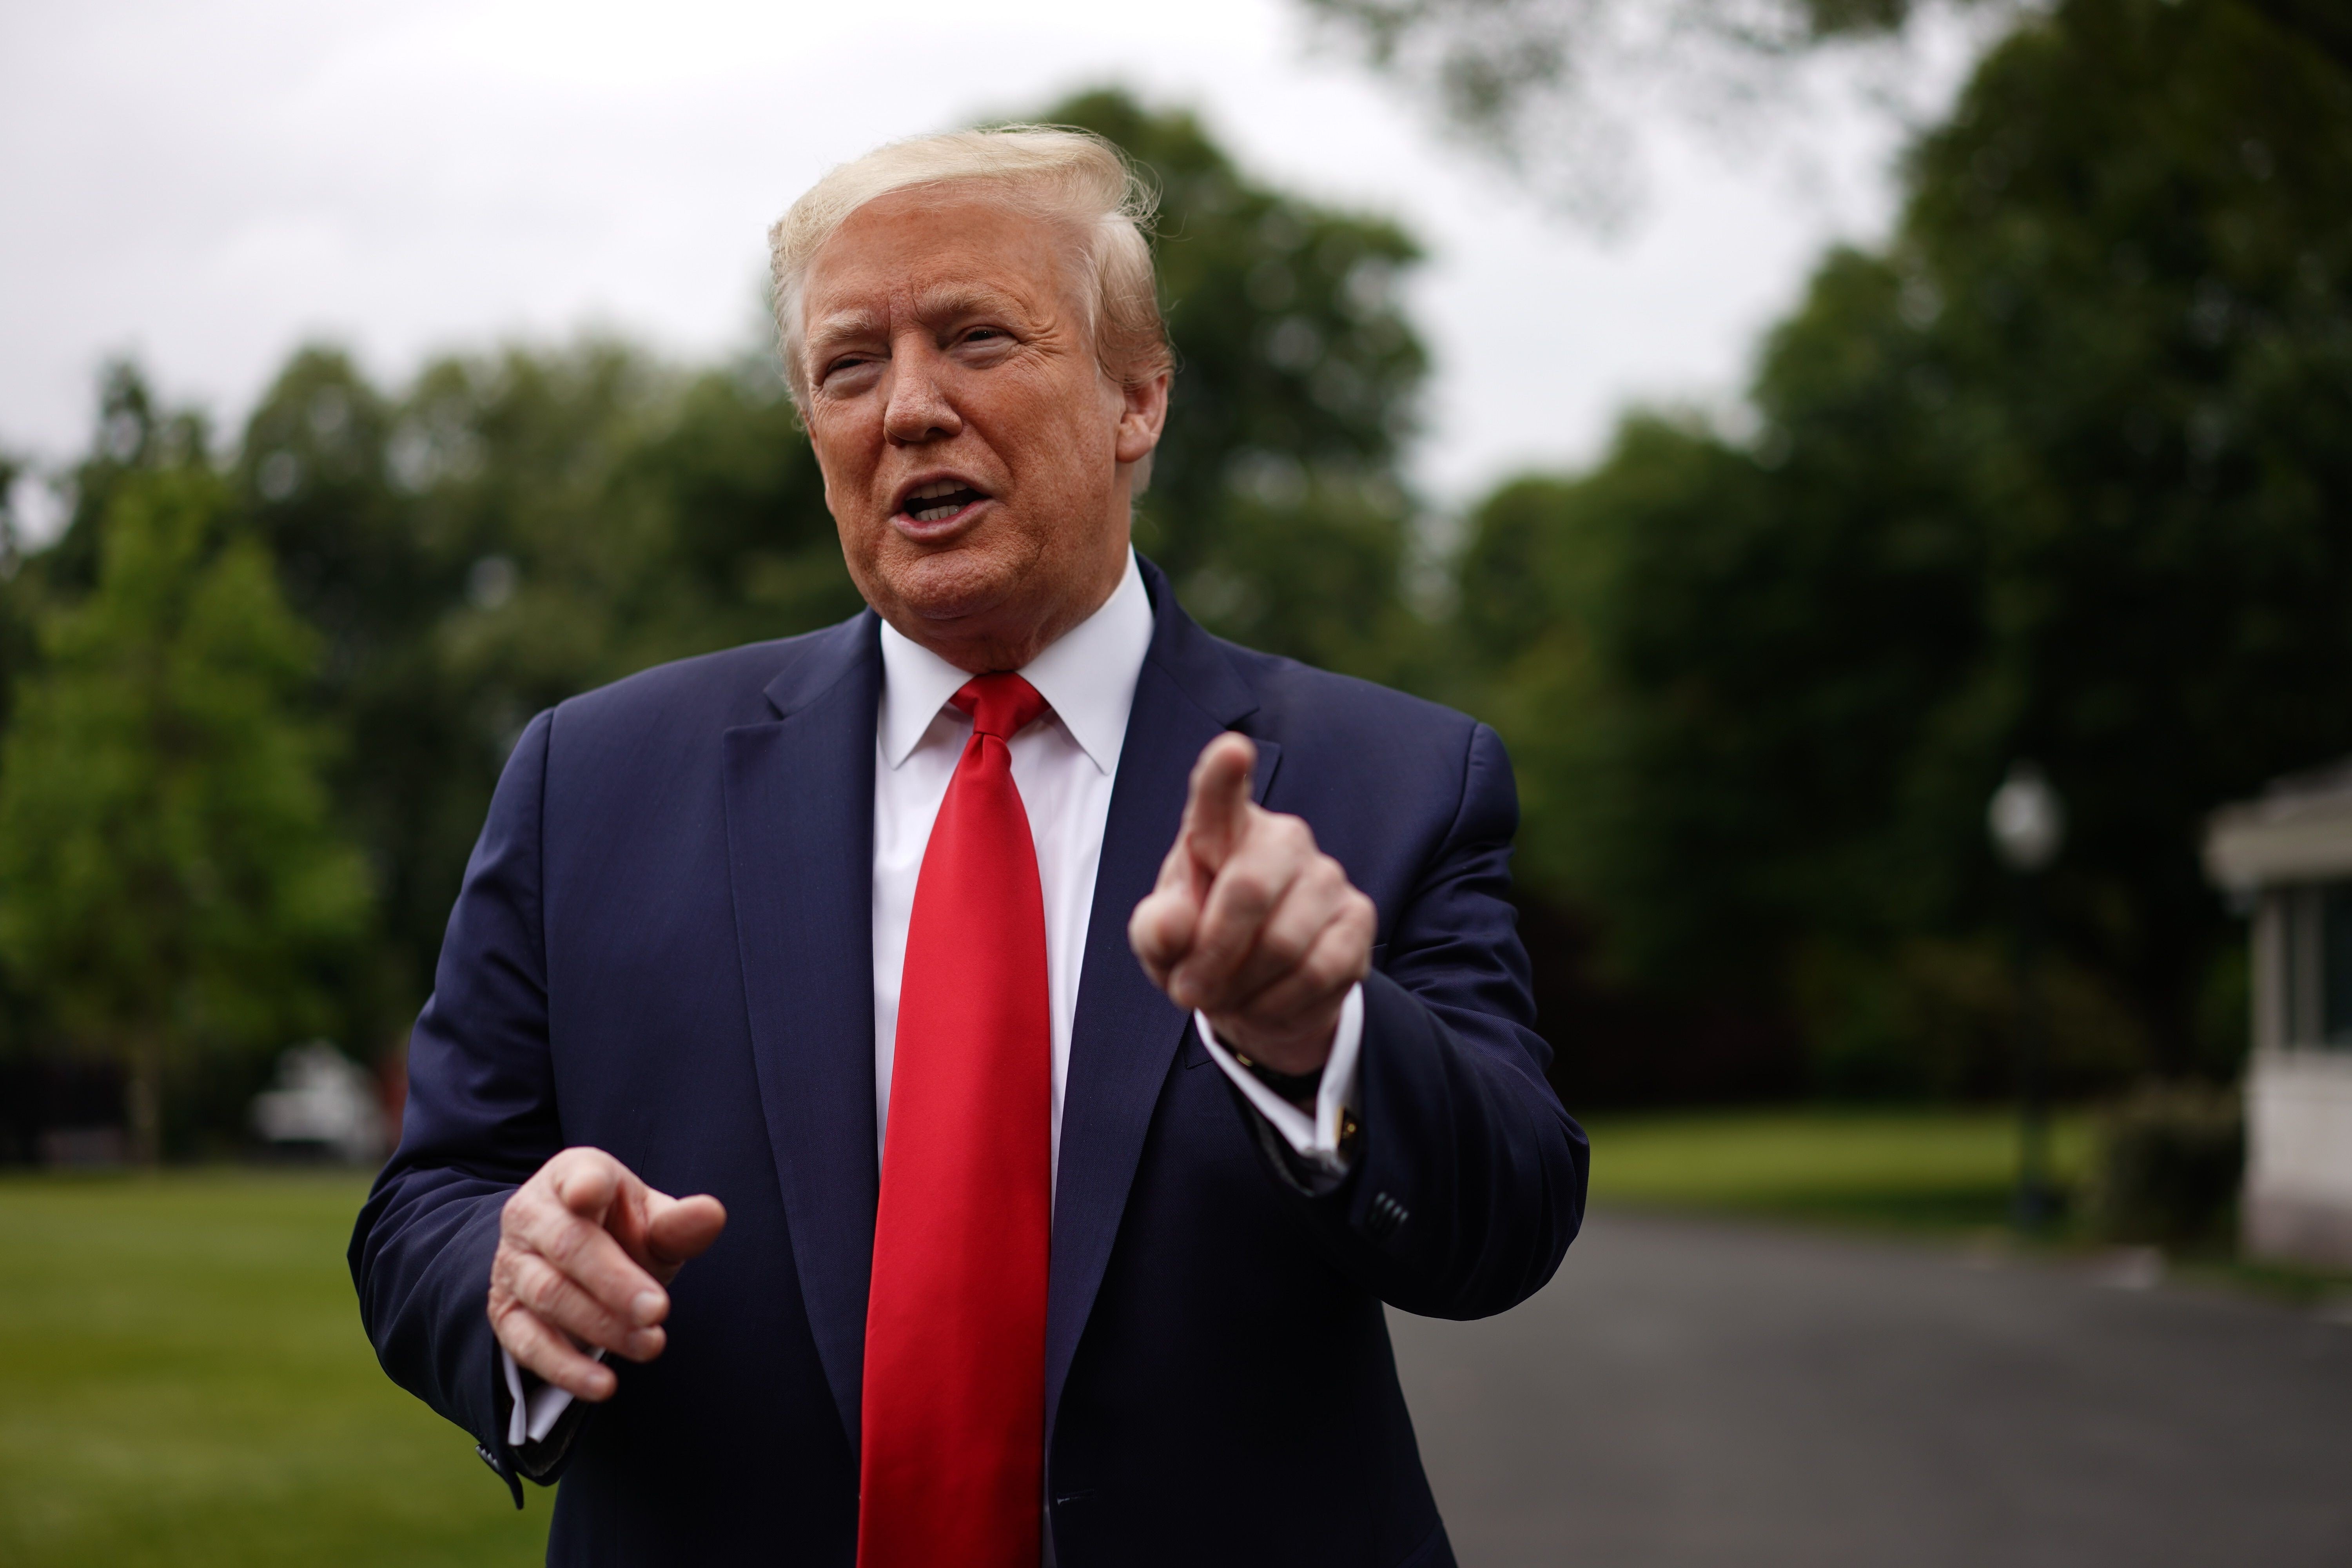 Donald Trump speaks to the press outside the White House in May 2020. Photo: AFP